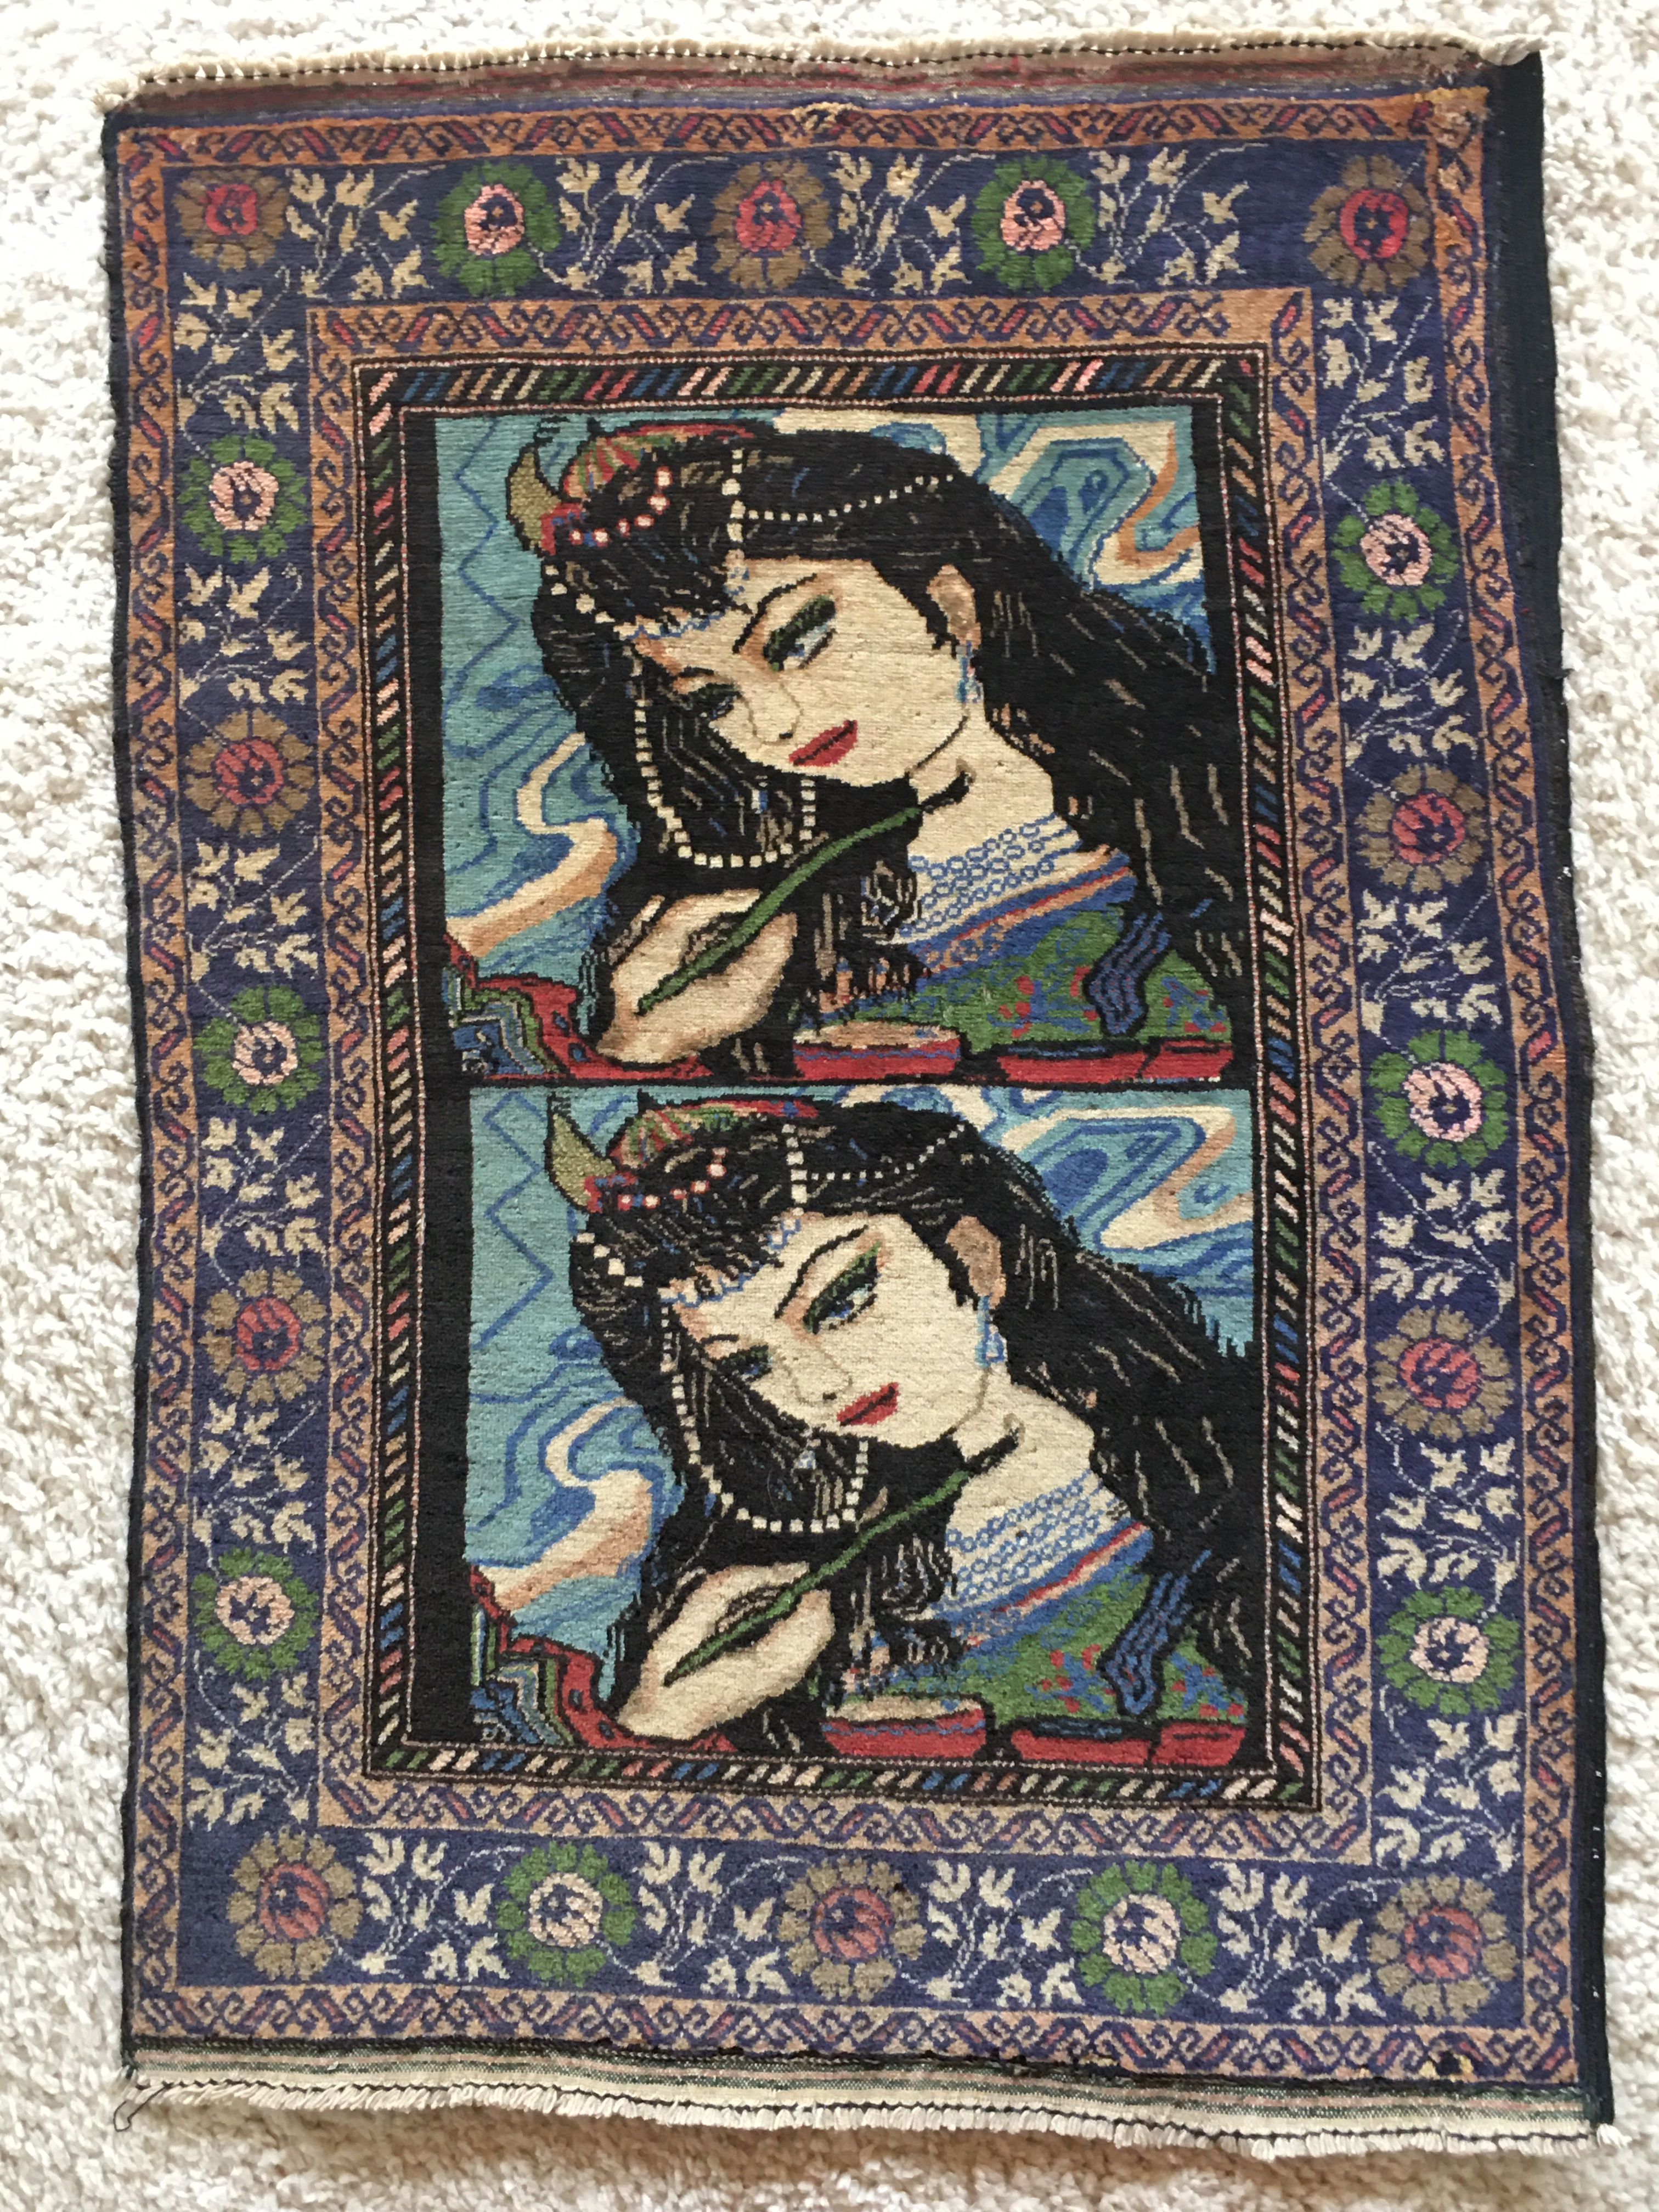 A full view of the Shirin rug. A complicated border of flowers and stripes frames two identical representations of the Princess Shirin. A hand is painting her as a portrait, with detailed facial features, long black hair, an embroidered green dress, and jewels. Behind the face in the portrait are zig-zagging lines that represent milk flowing down a mountain